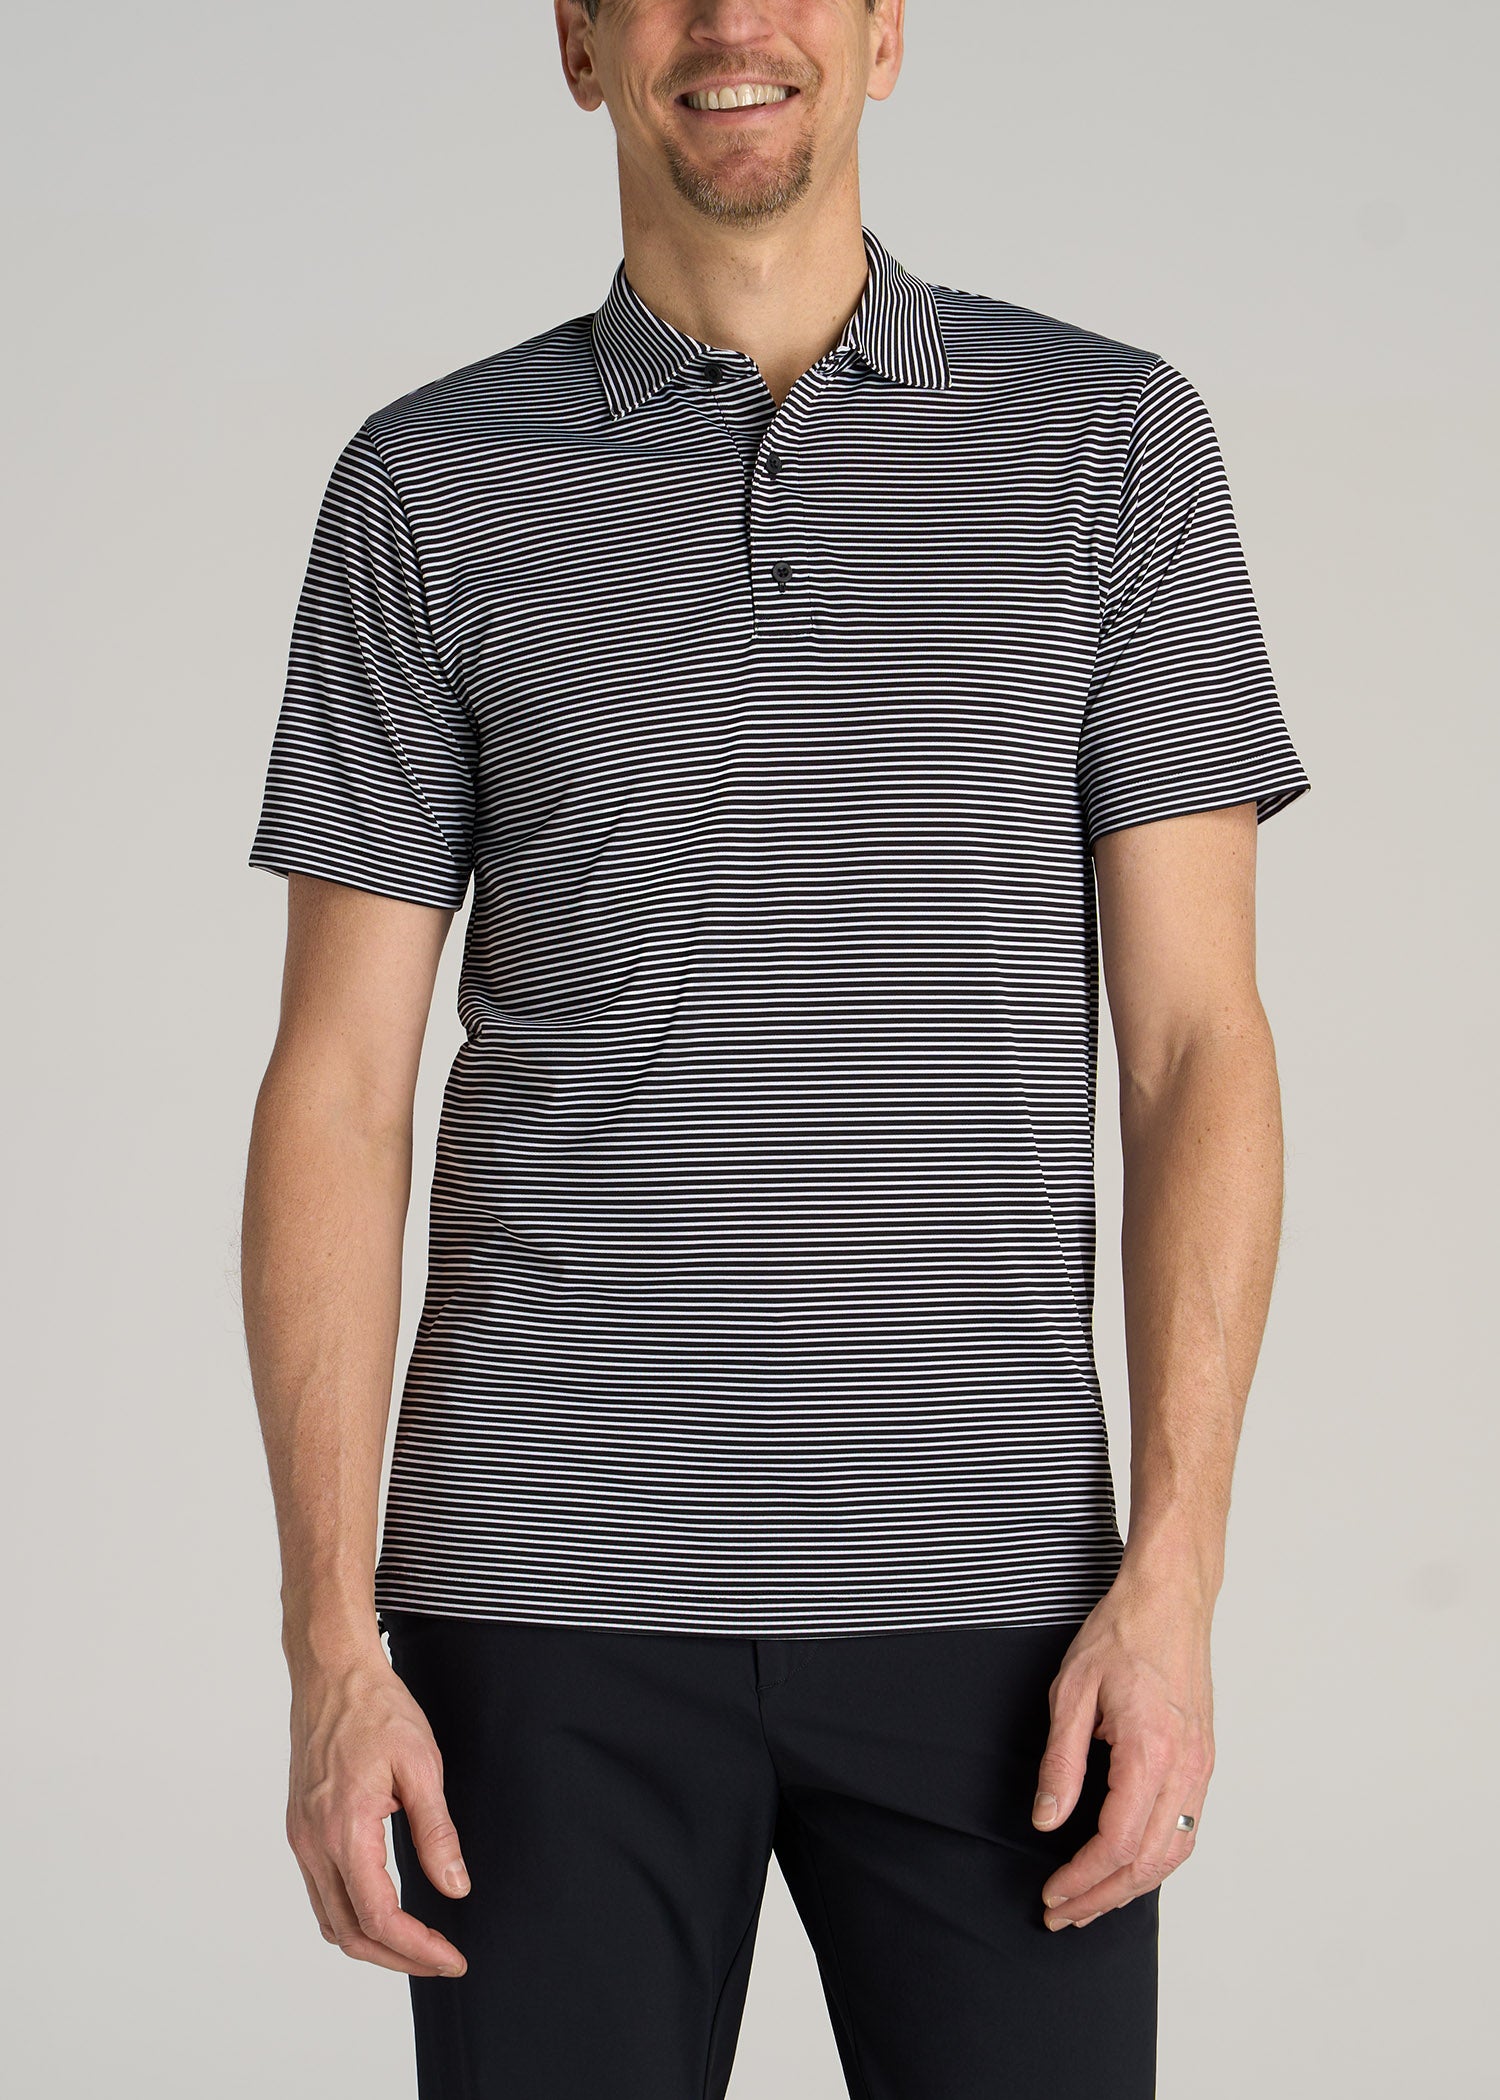 Golf Clothing for Tall Men